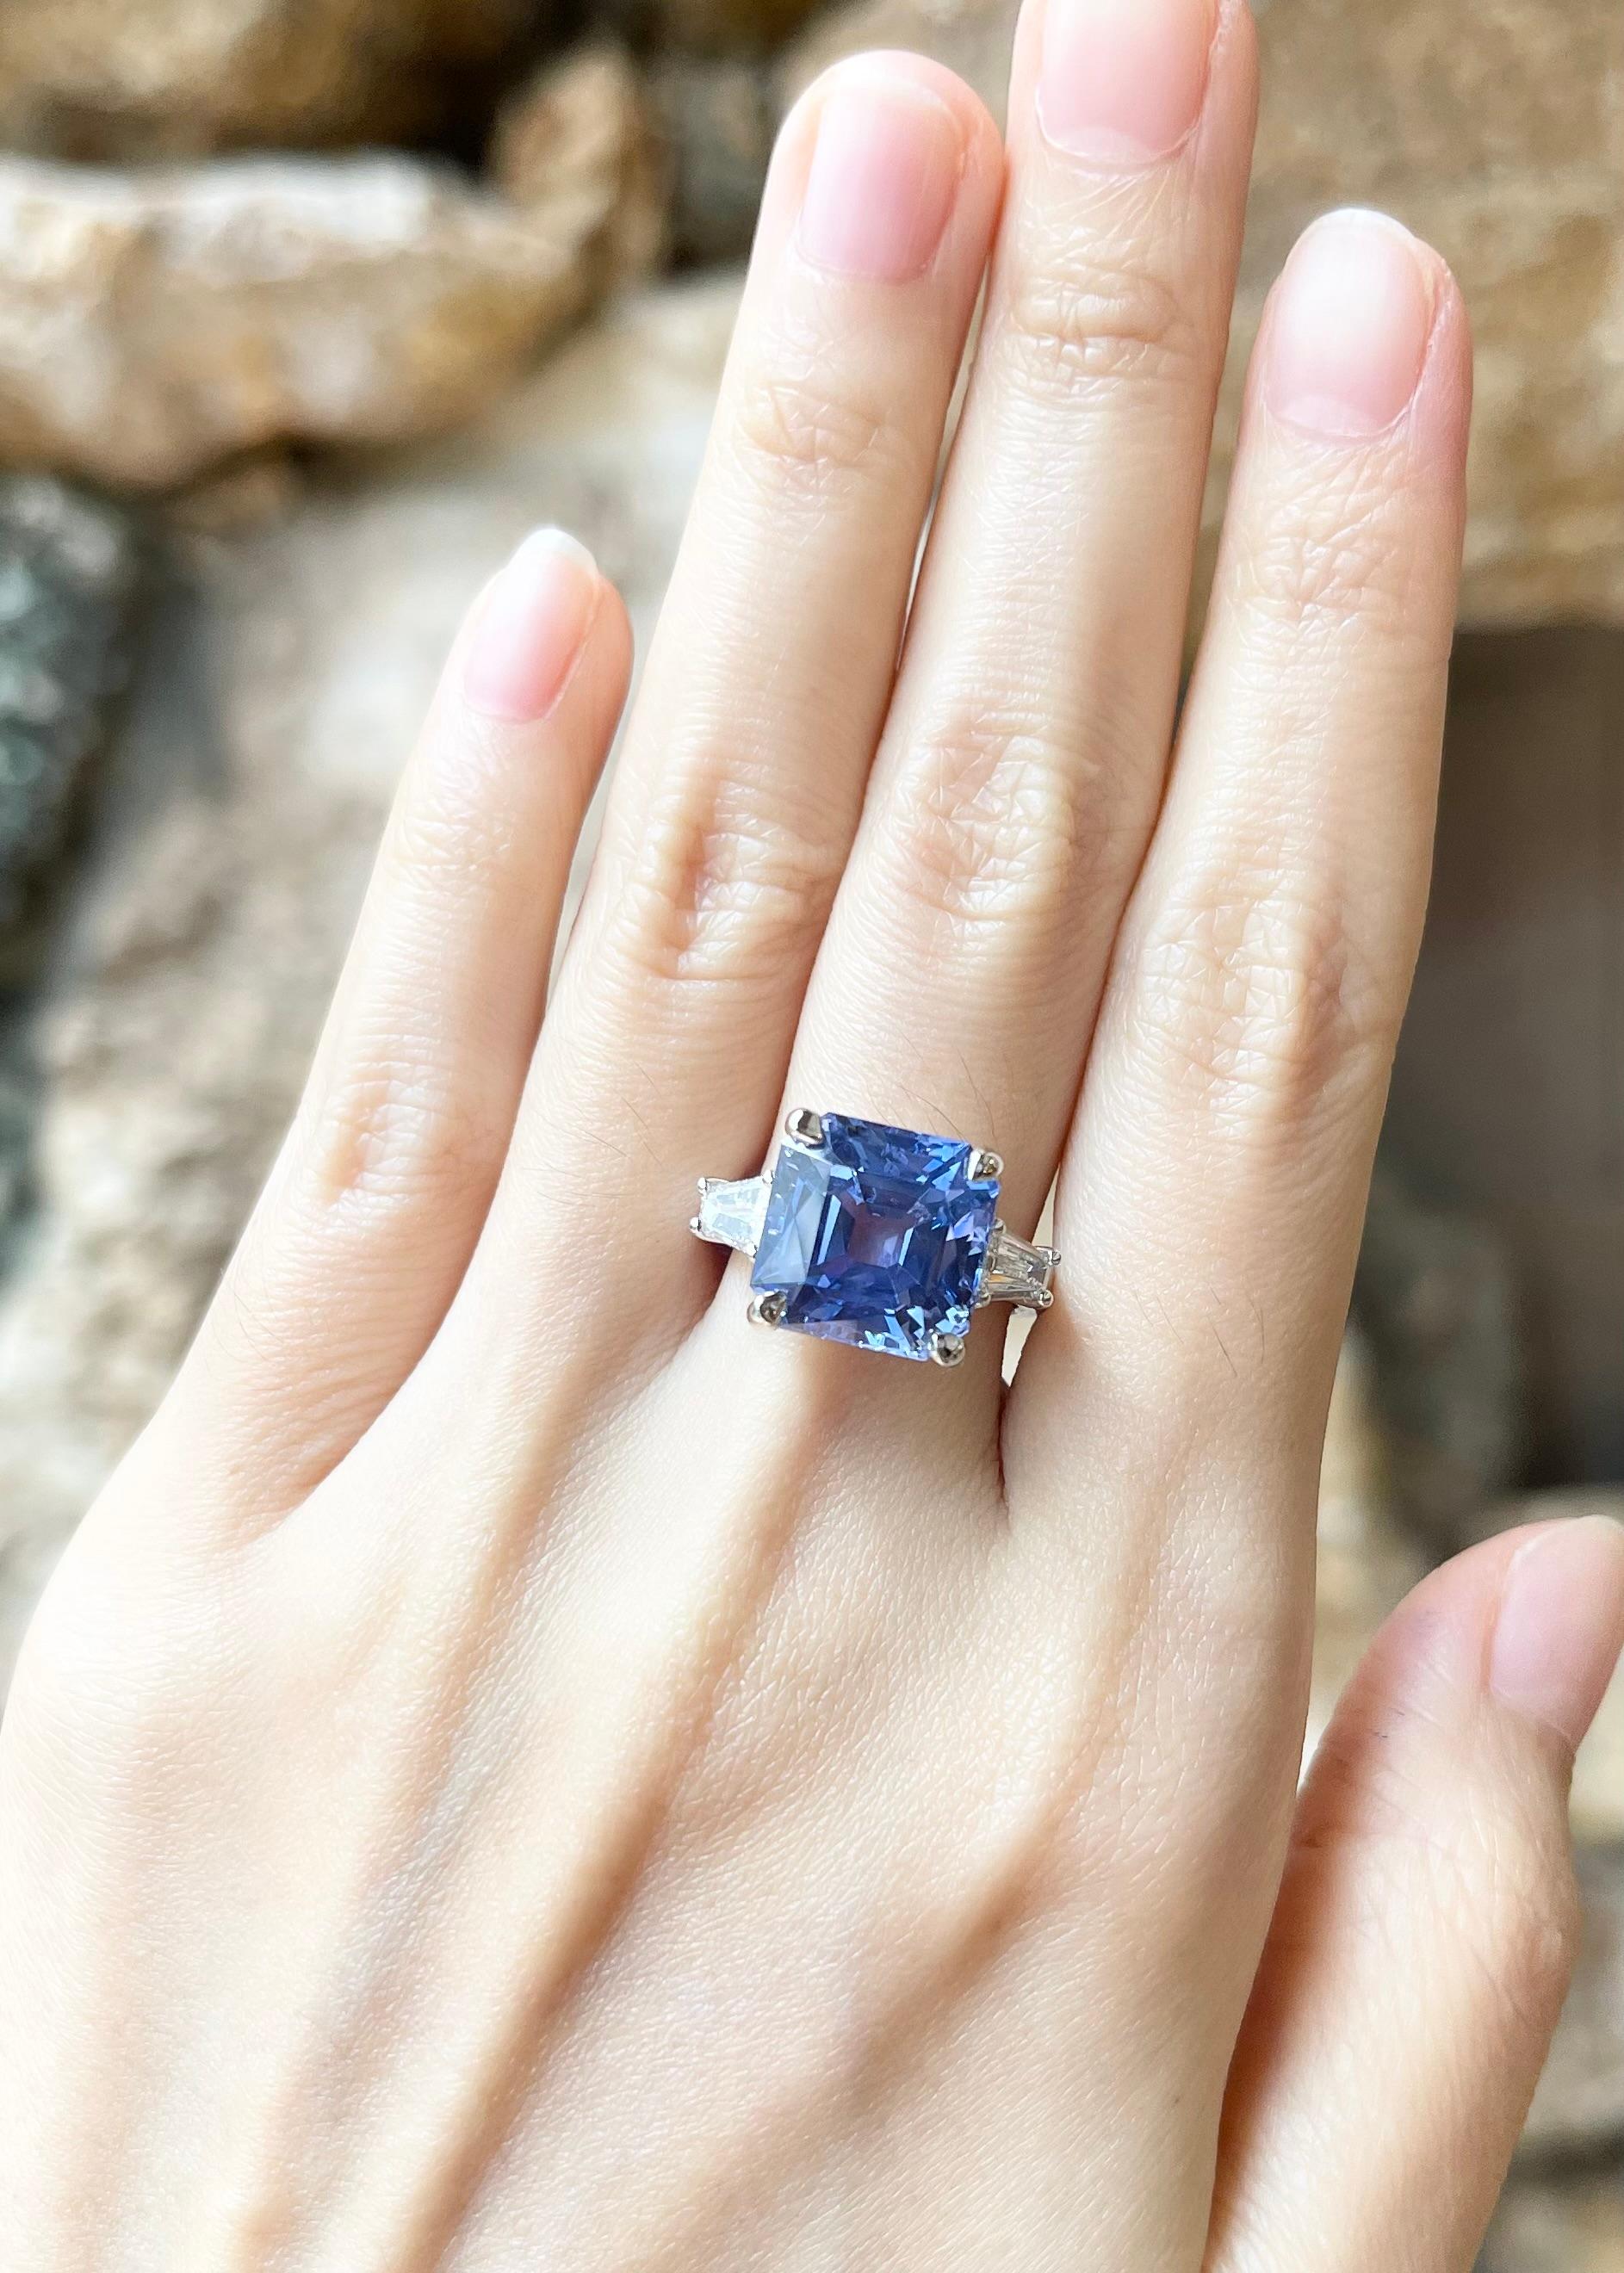 Blue Sapphire 10.62 carats with Diamond (U/H Color) 0.60 carat Ring set in Platinum 950 Settings

Width:  1.2 cm 
Length: 1.2 cm
Ring Size: 53
Total Weight: 10.79 grams

